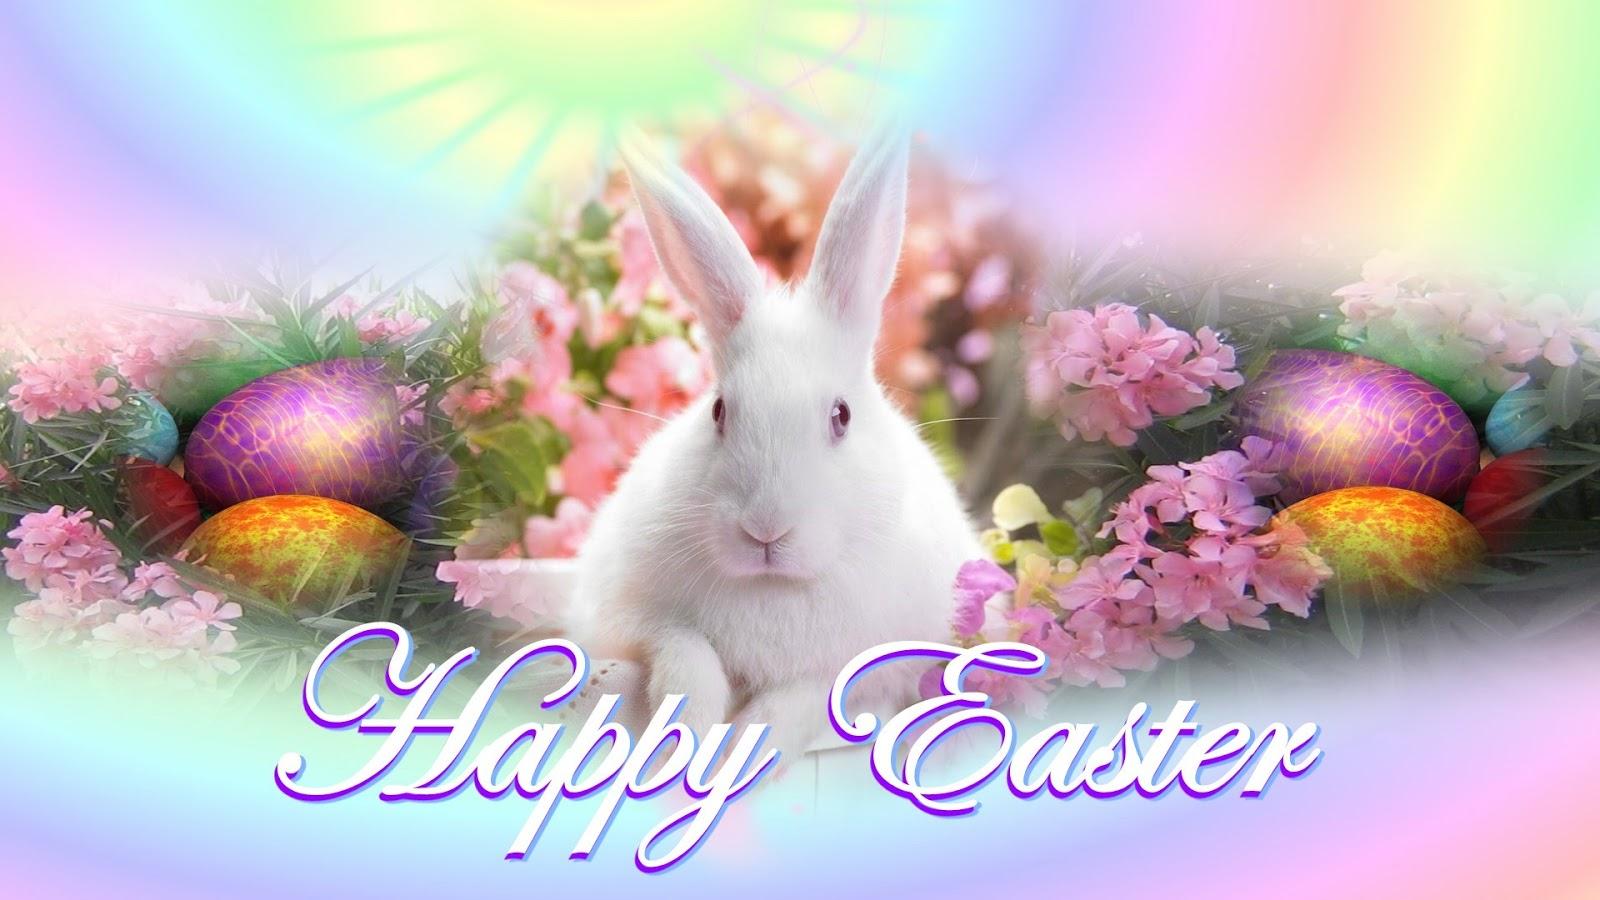 Happy Easter Day 2020.. Download 2020 Wishes Image HD Wallpaper Festivals - Everyday is a Festival!